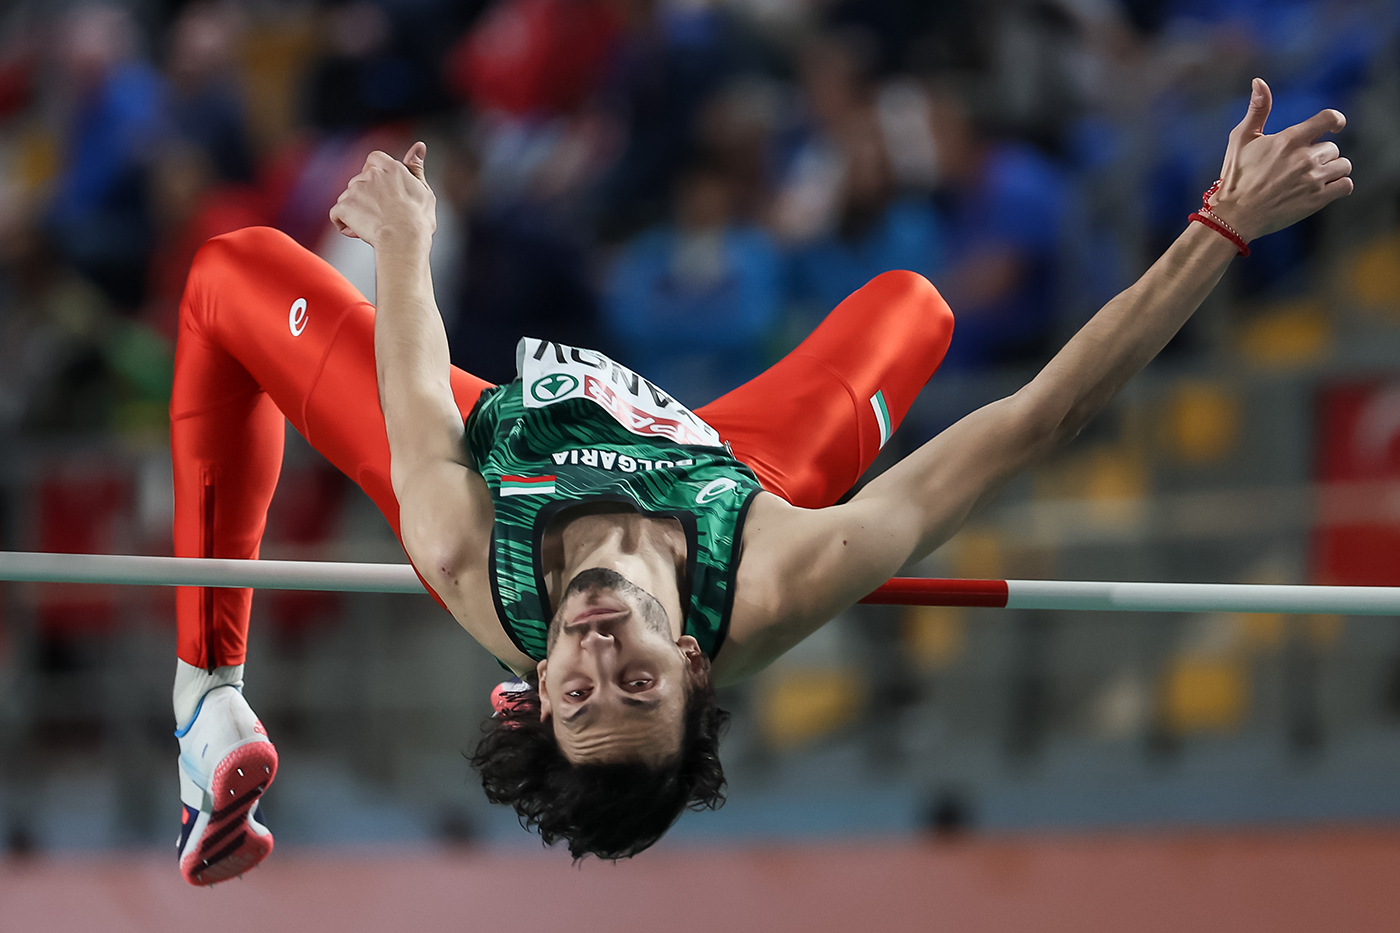 Tihomir Ivanov of Bulgaria in action during the High Jump Men Qualification at the European Athletics Indoor Championships in Istanbul, Turkey, 03 March 2023.